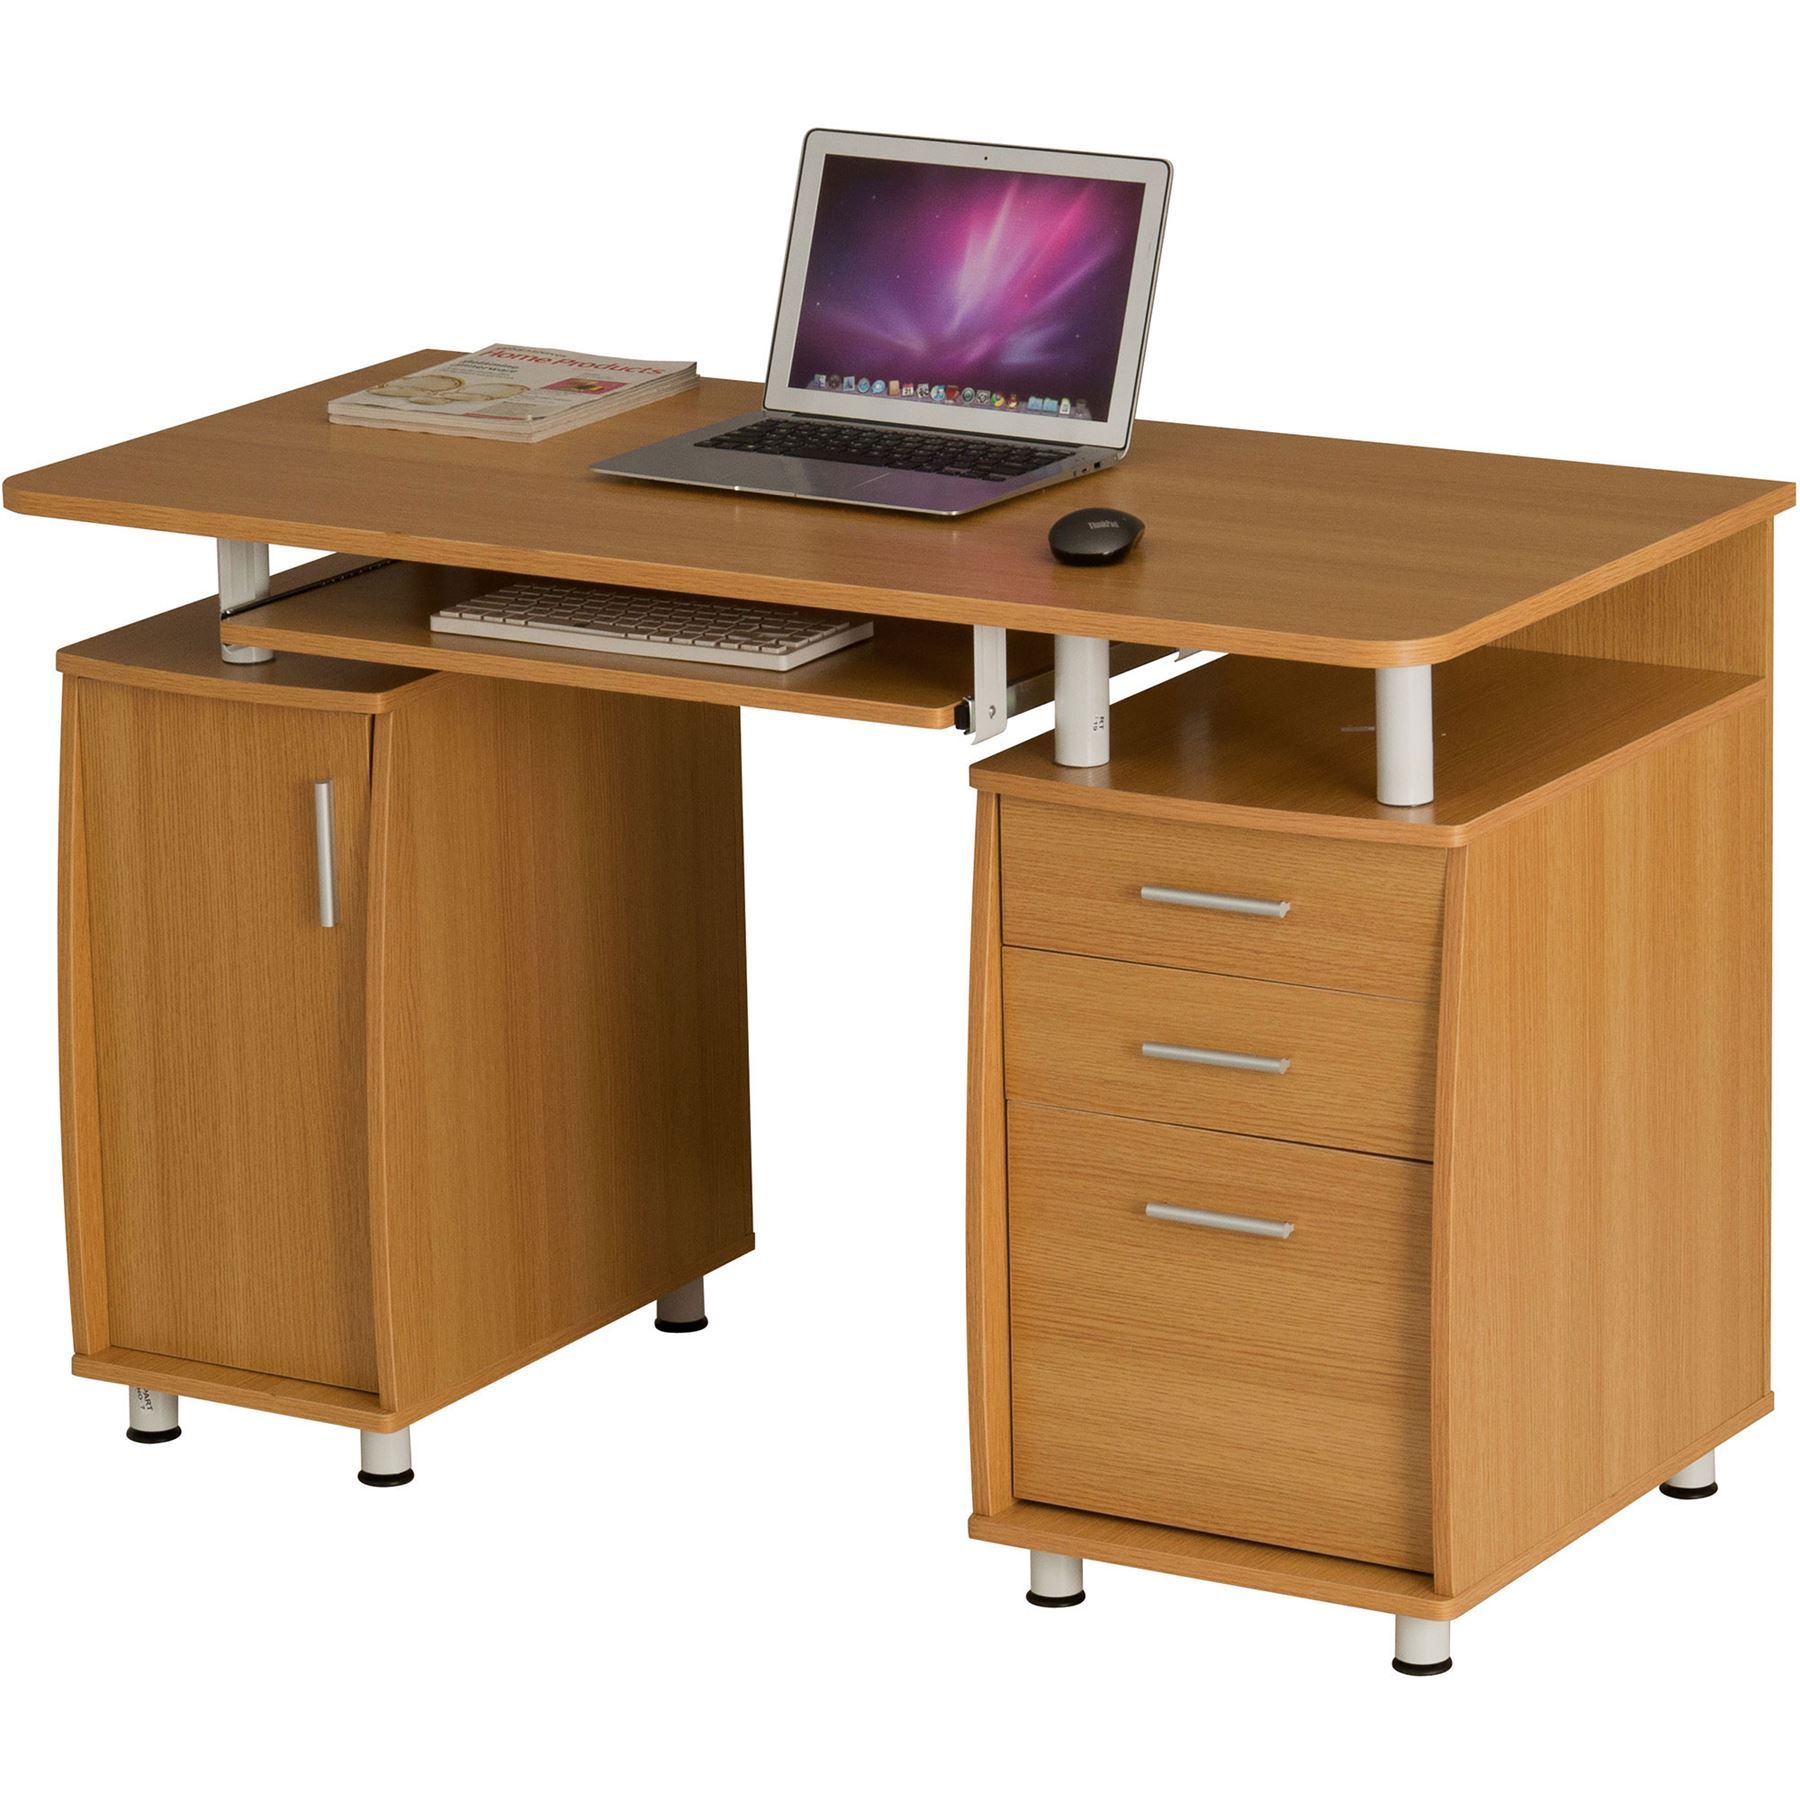 Computer Desk With Storage & A4 Filing Drawer Home Office – Piranha Intended For Executive Desks With Dual Storage (View 13 of 15)